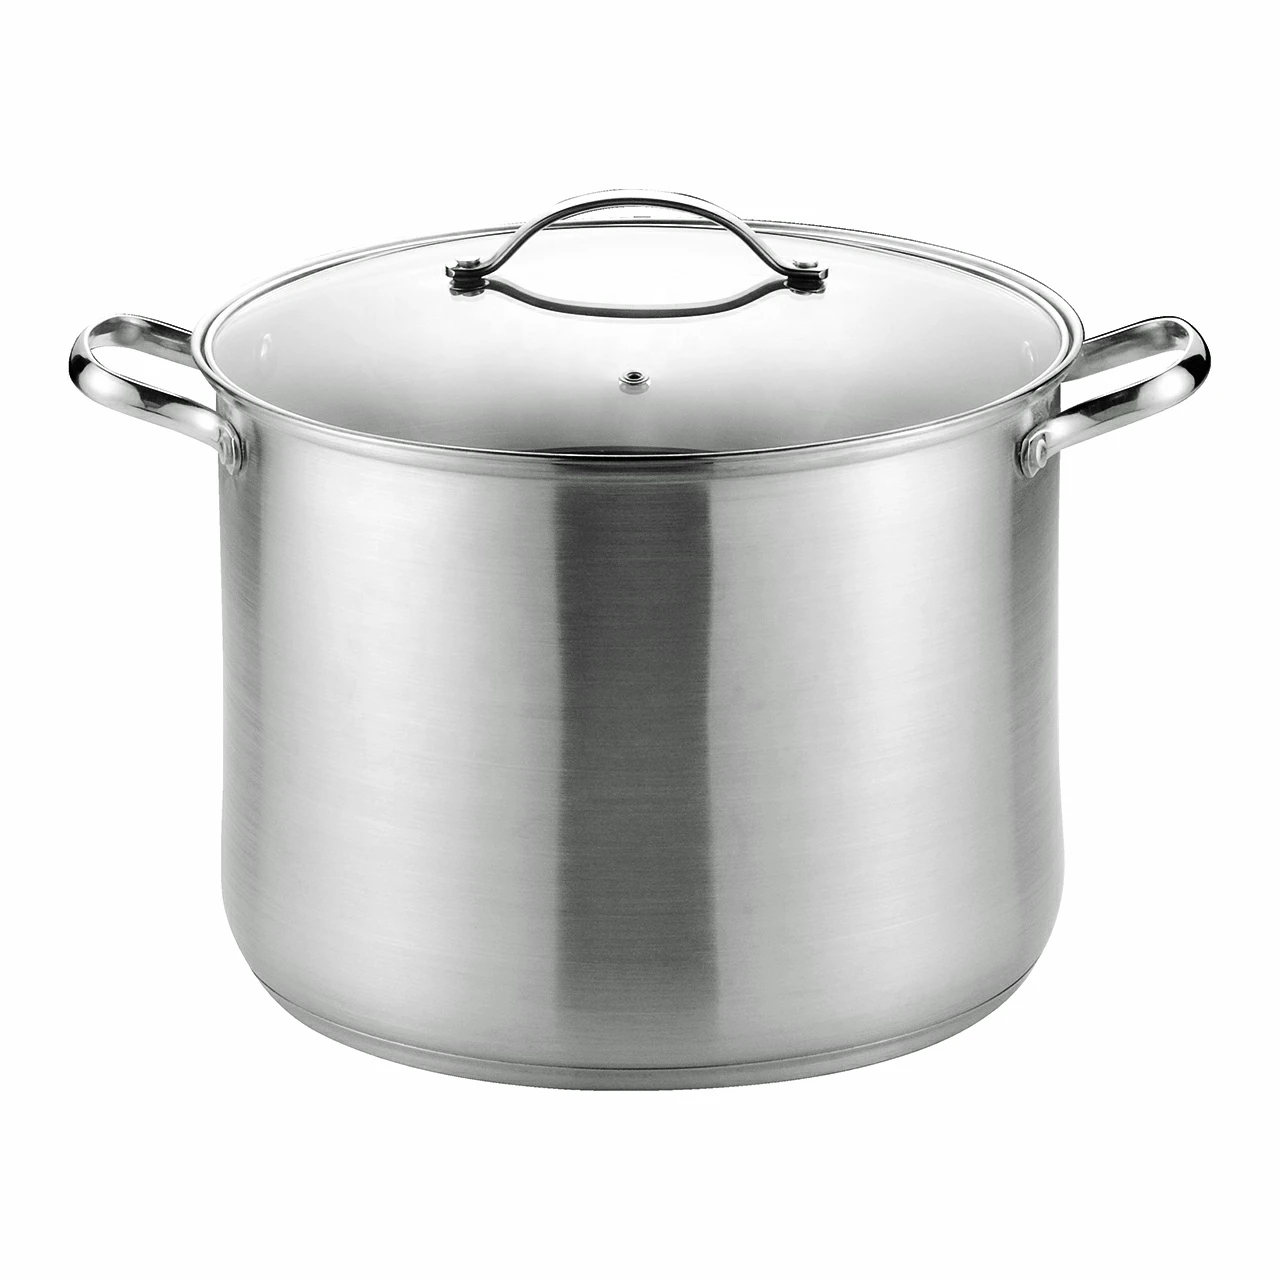 Belly Shape Stainless Steel Cookware Soup Stock Pot for Home Cooking